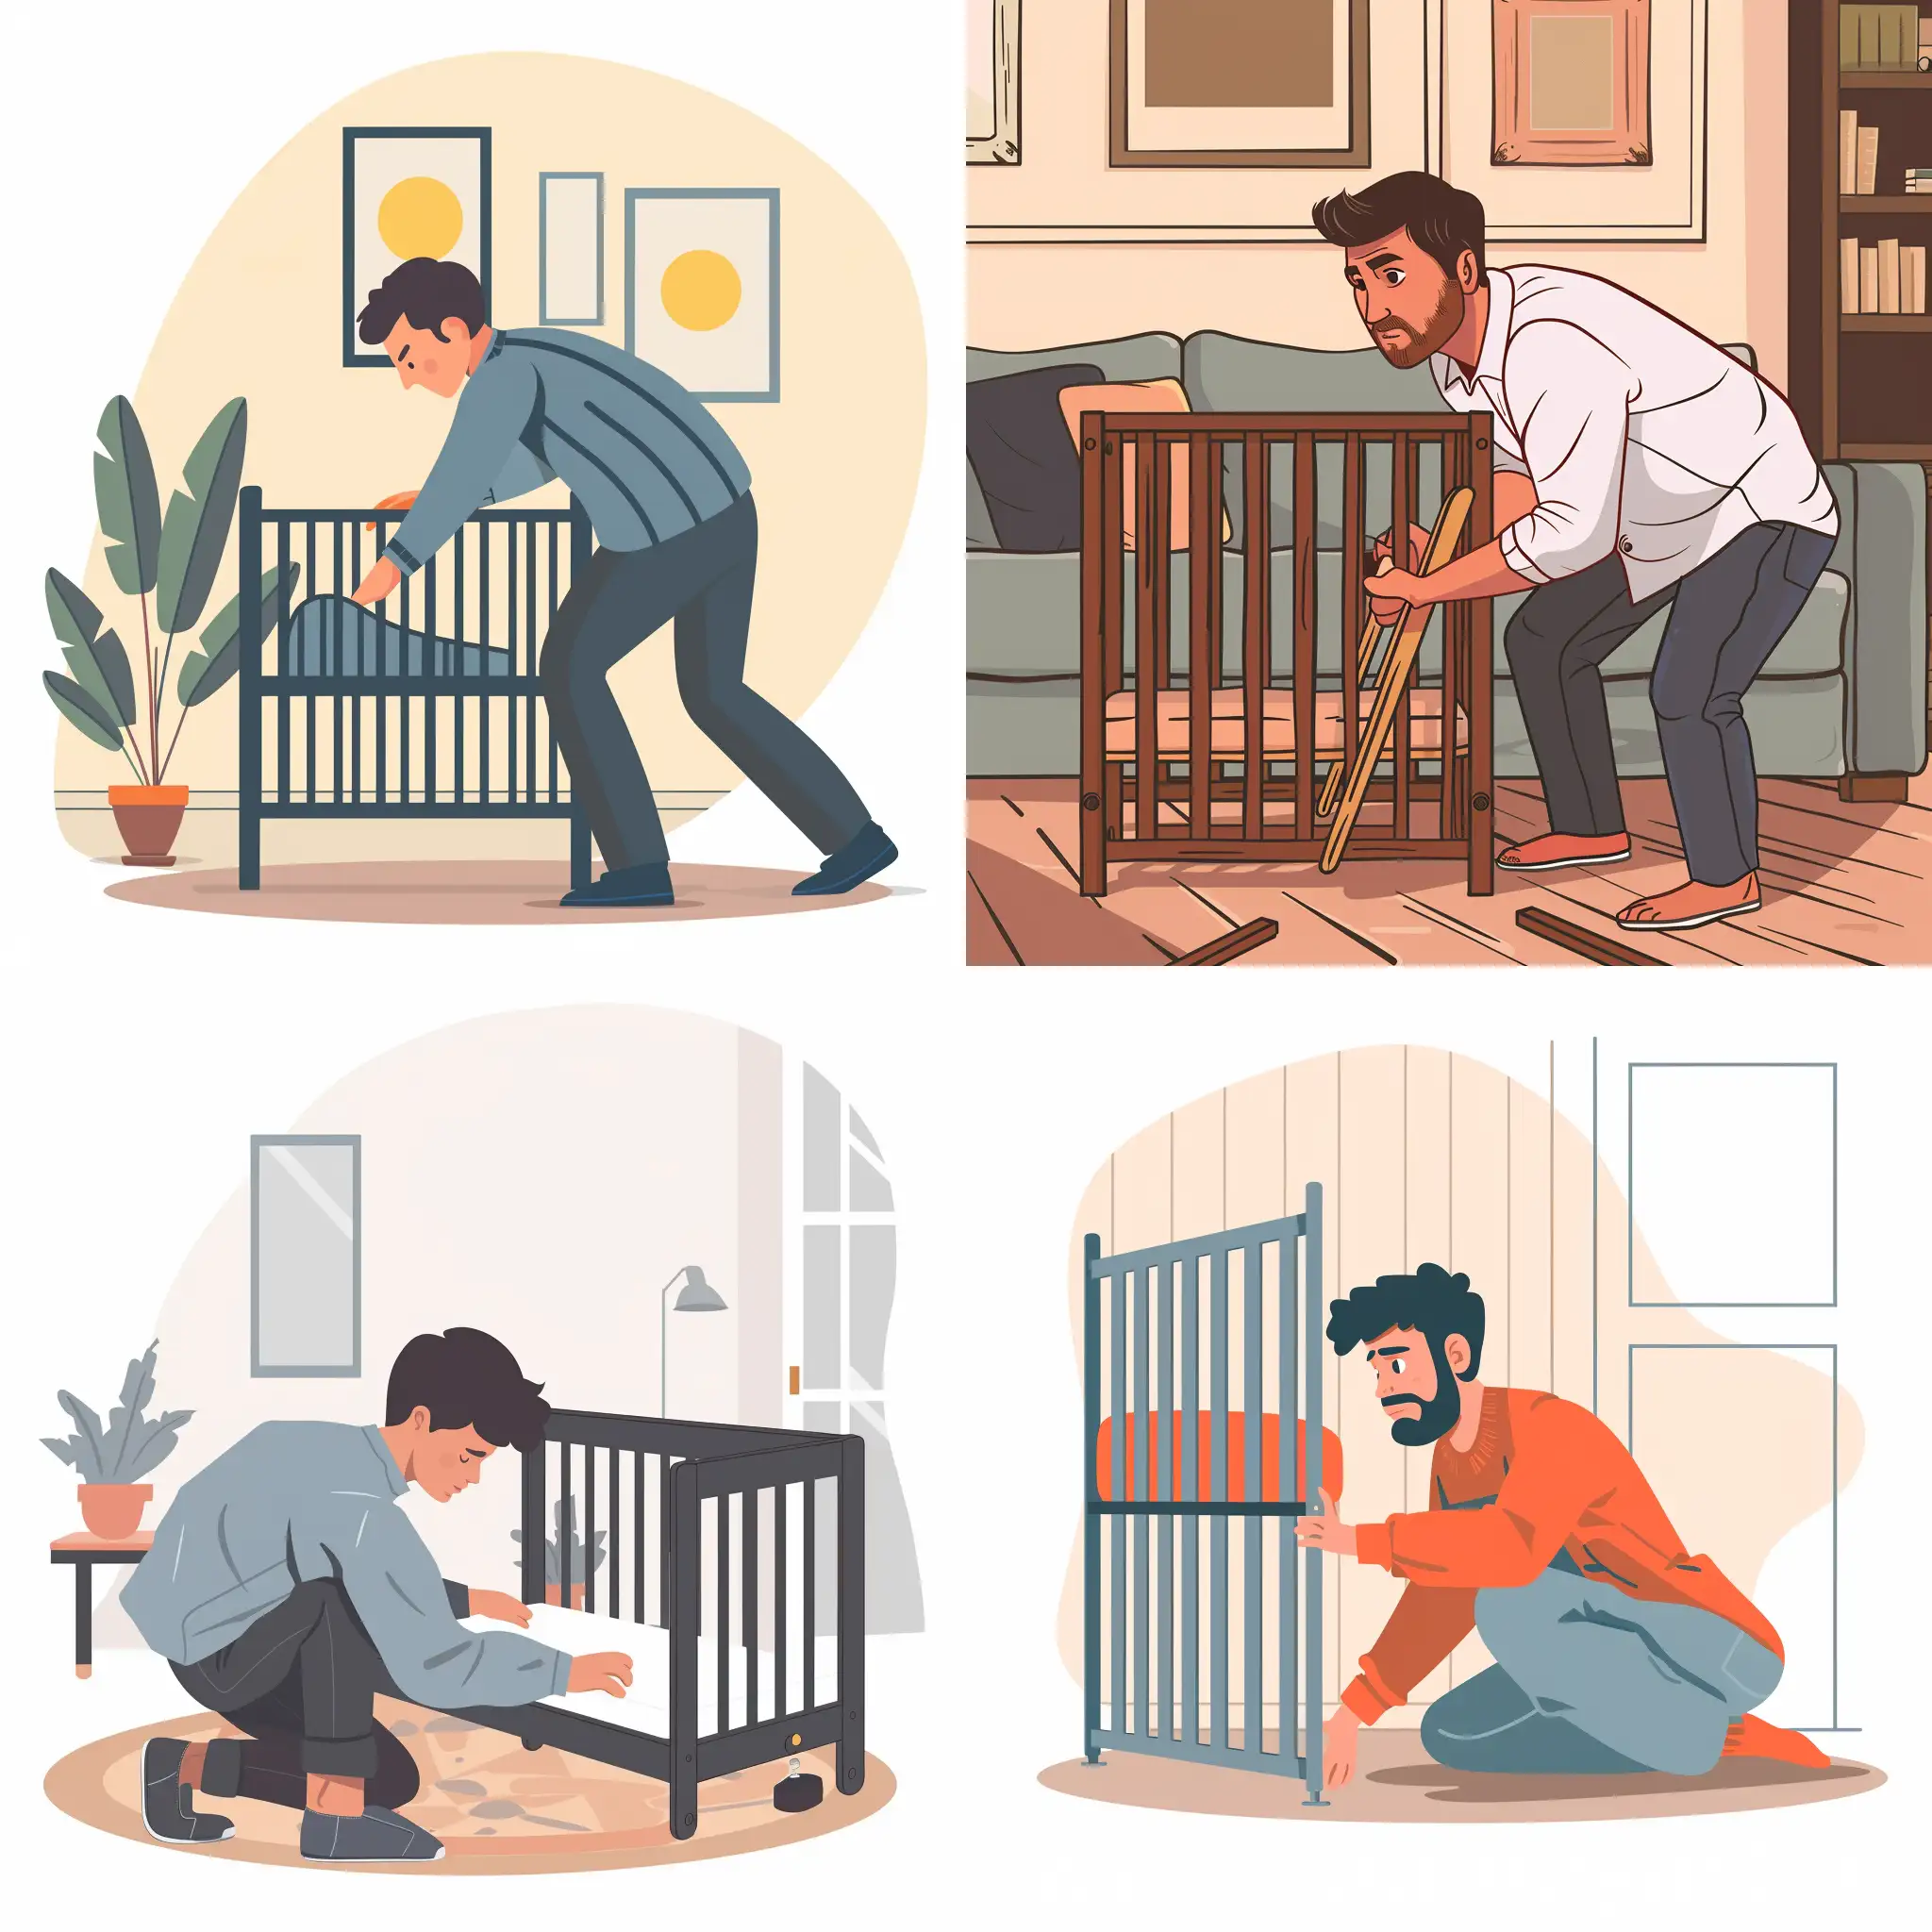 Inept-Dad-Assembles-Baby-Cot-in-Hilarious-Living-Room-Scene